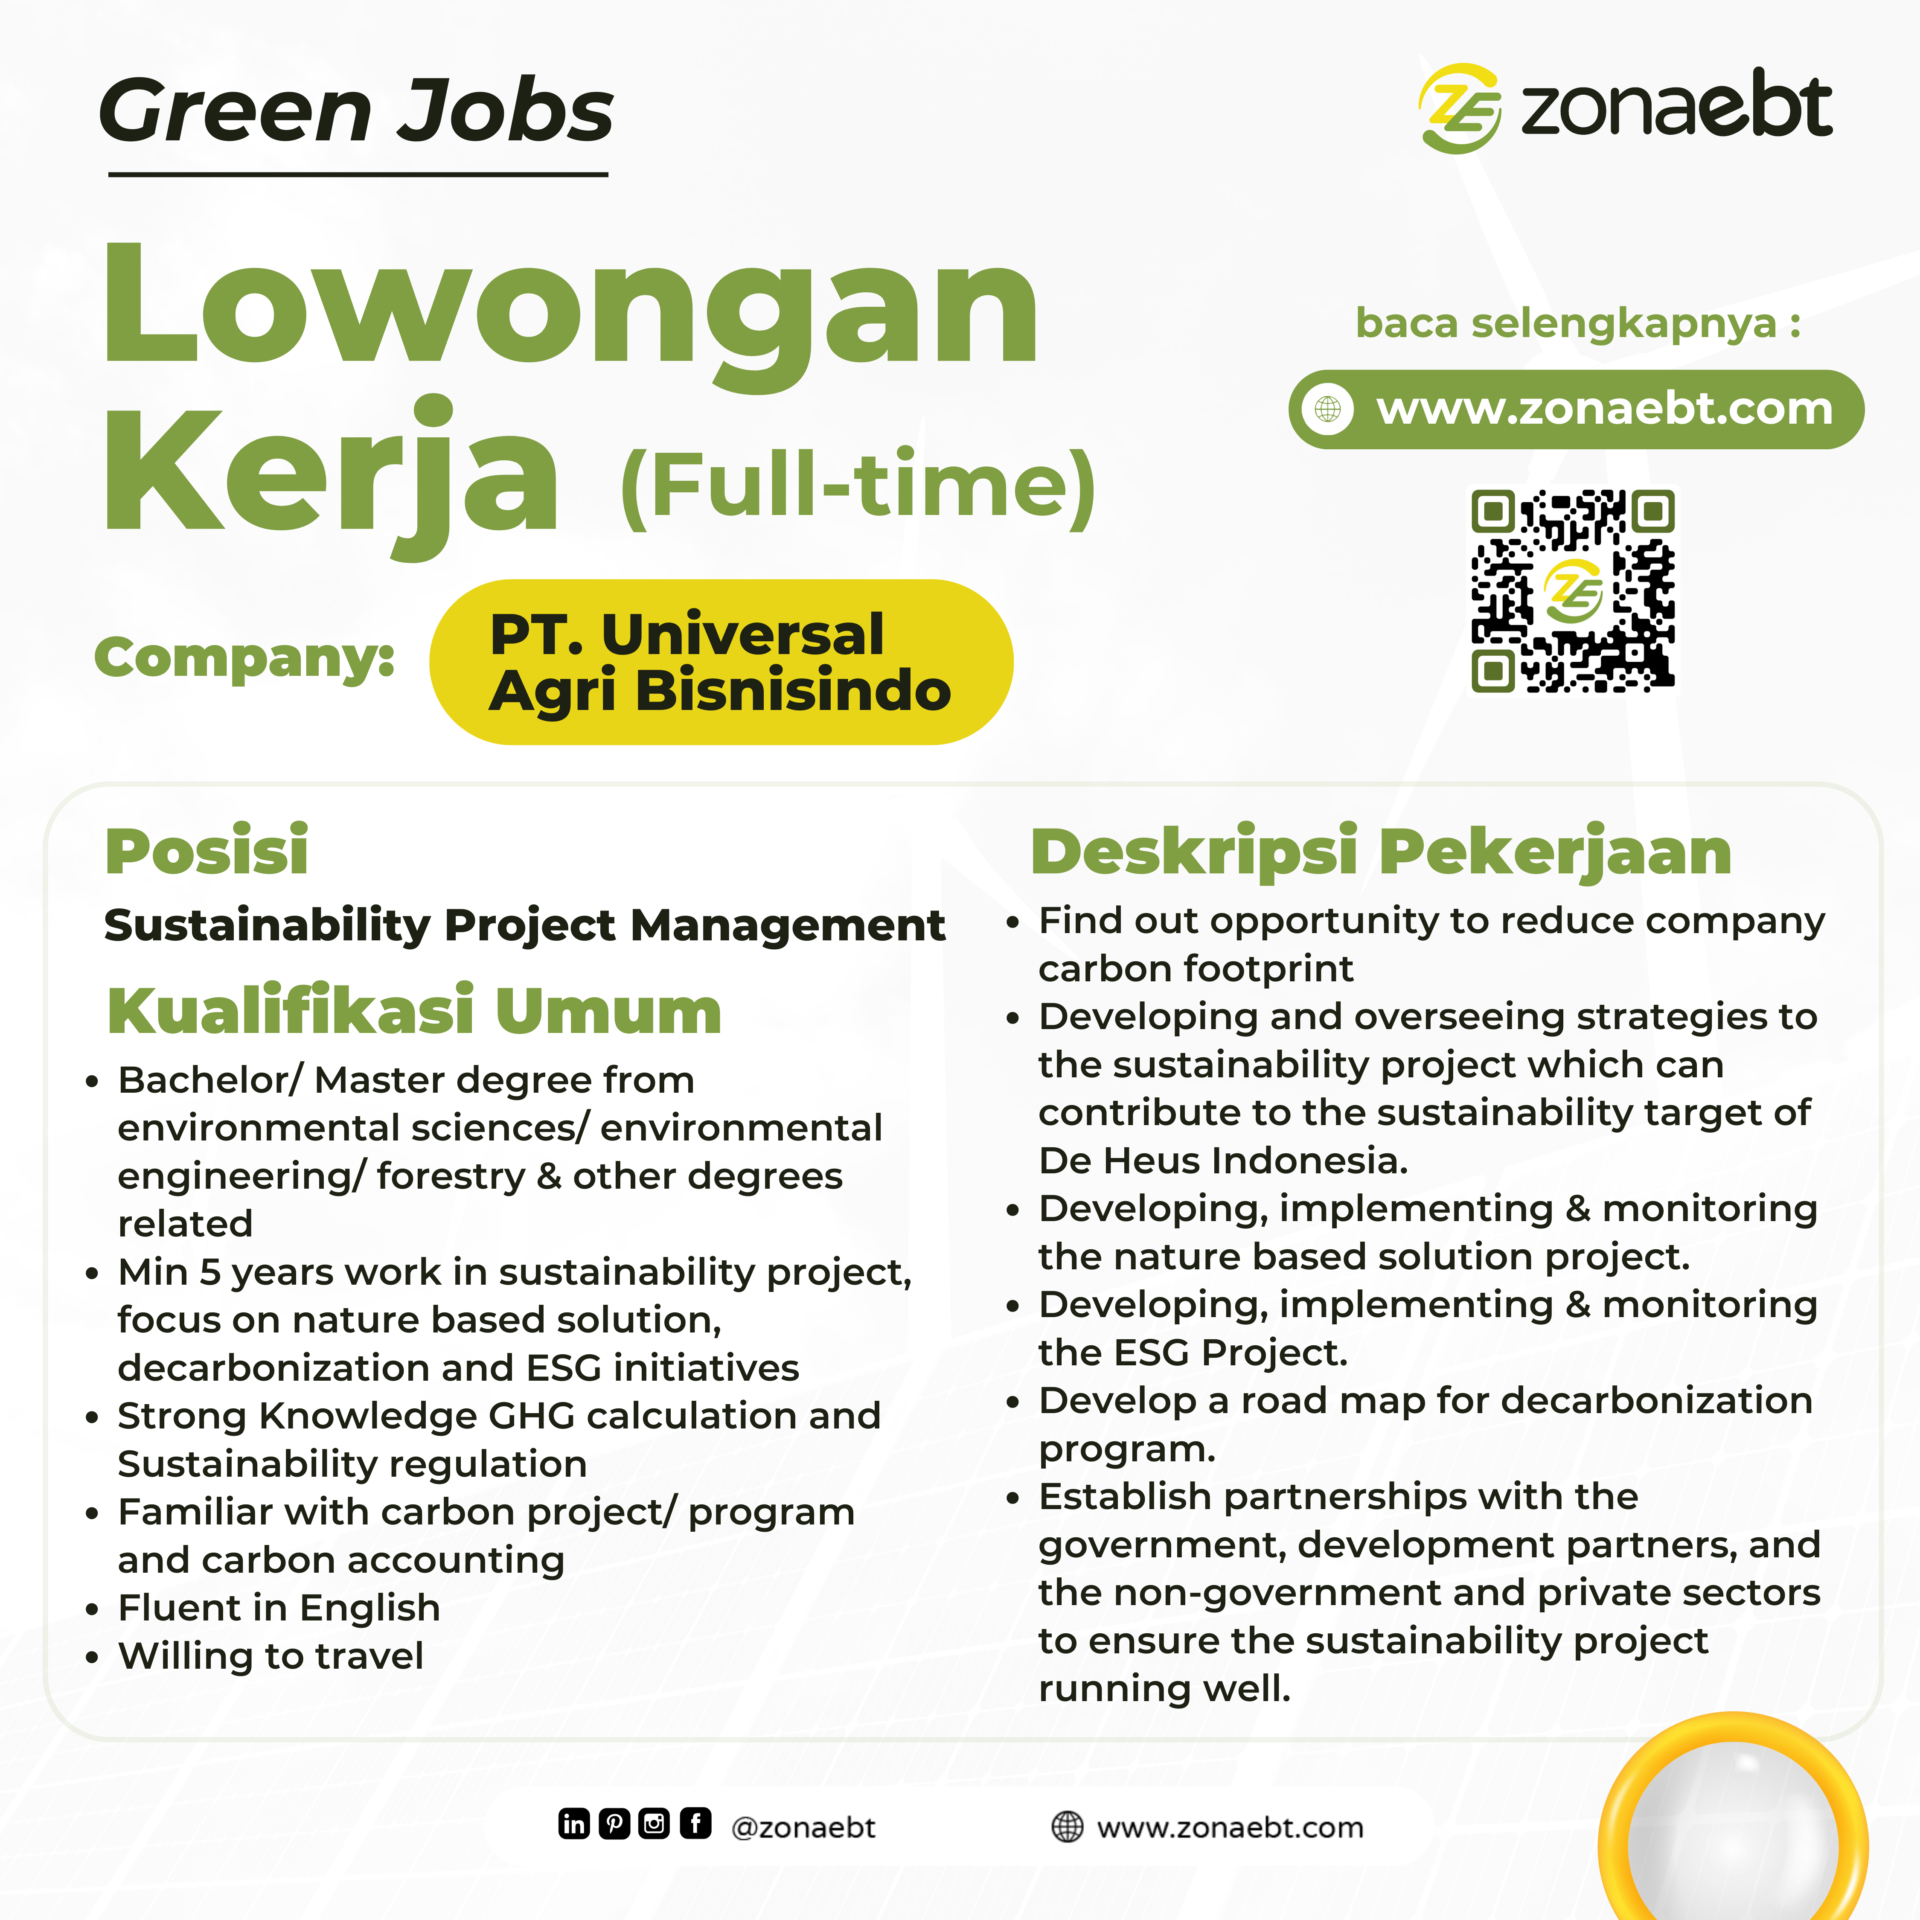 Sustainability Project Management greenjobs zonaebt.com